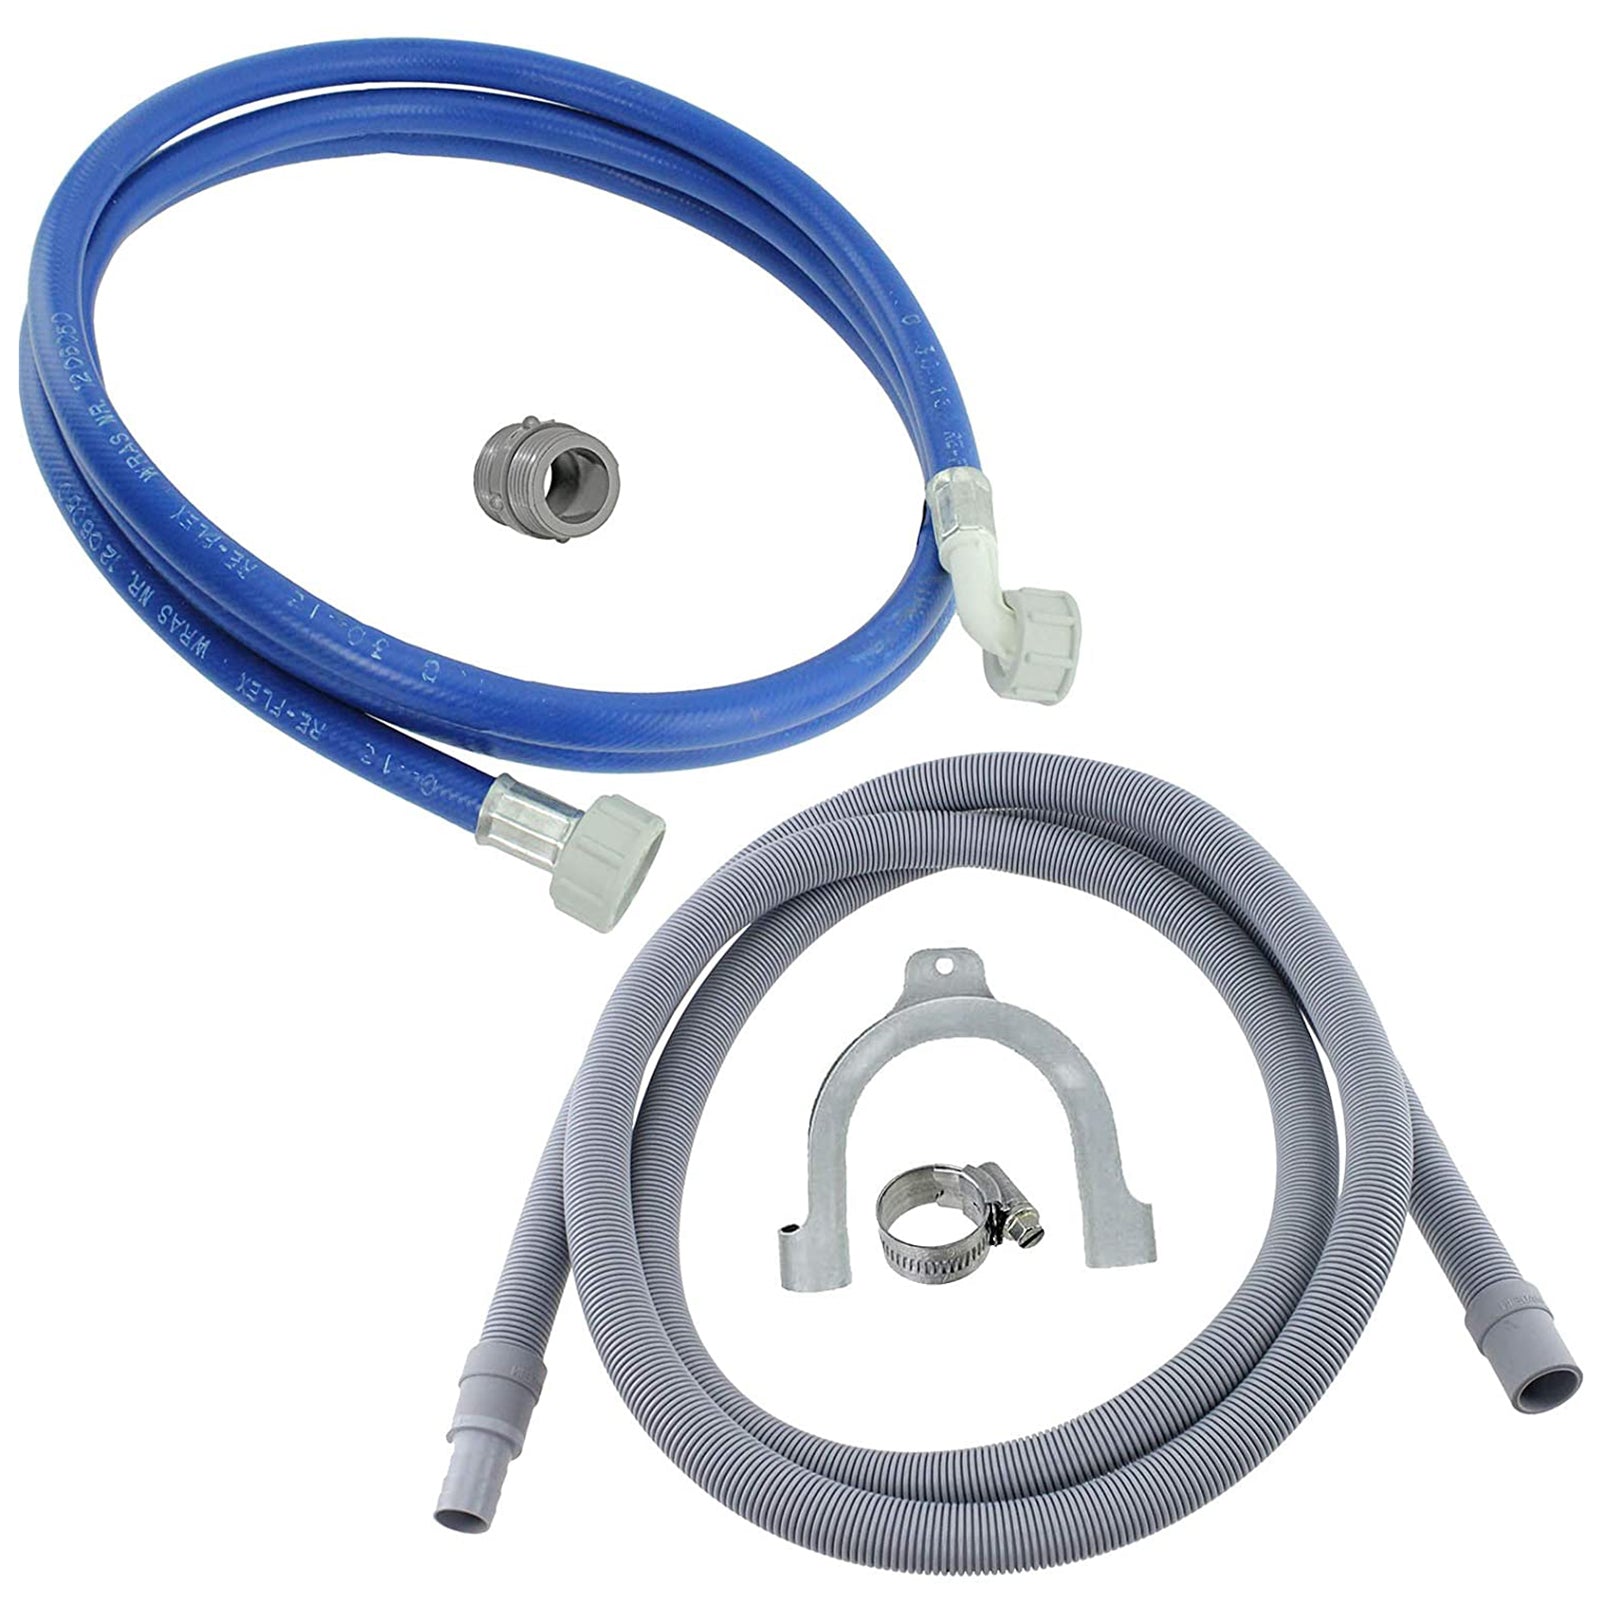 Water Fill Pipe & Drain Hose Extension Kit for Proline Washing Machine Dishwasher (2.5m, 18mm / 22mm)